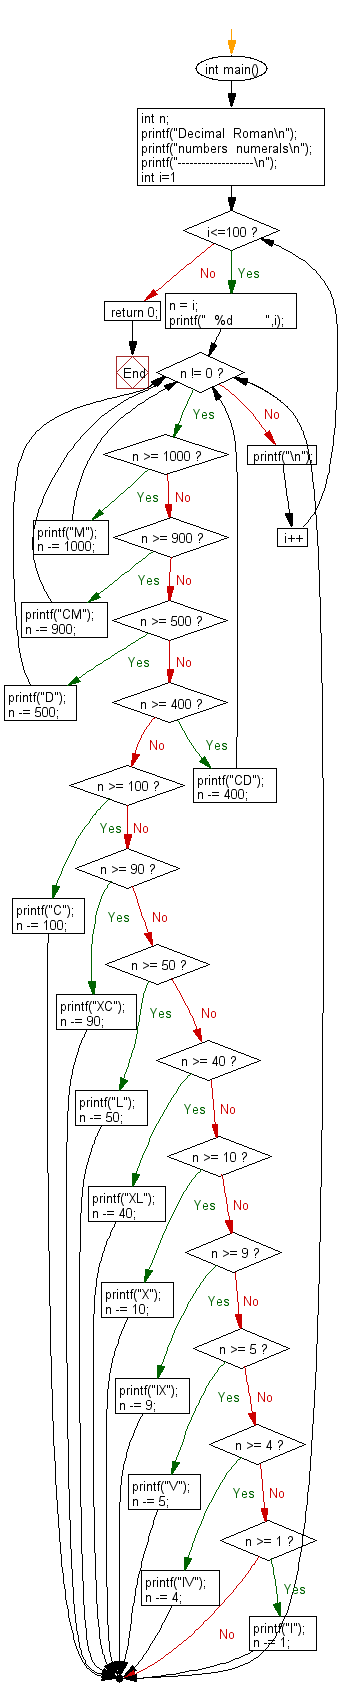 C Programming Flowchart: Print a table of all the Roman numeral equivalents of the decimal numbers in the range 1 to 50.